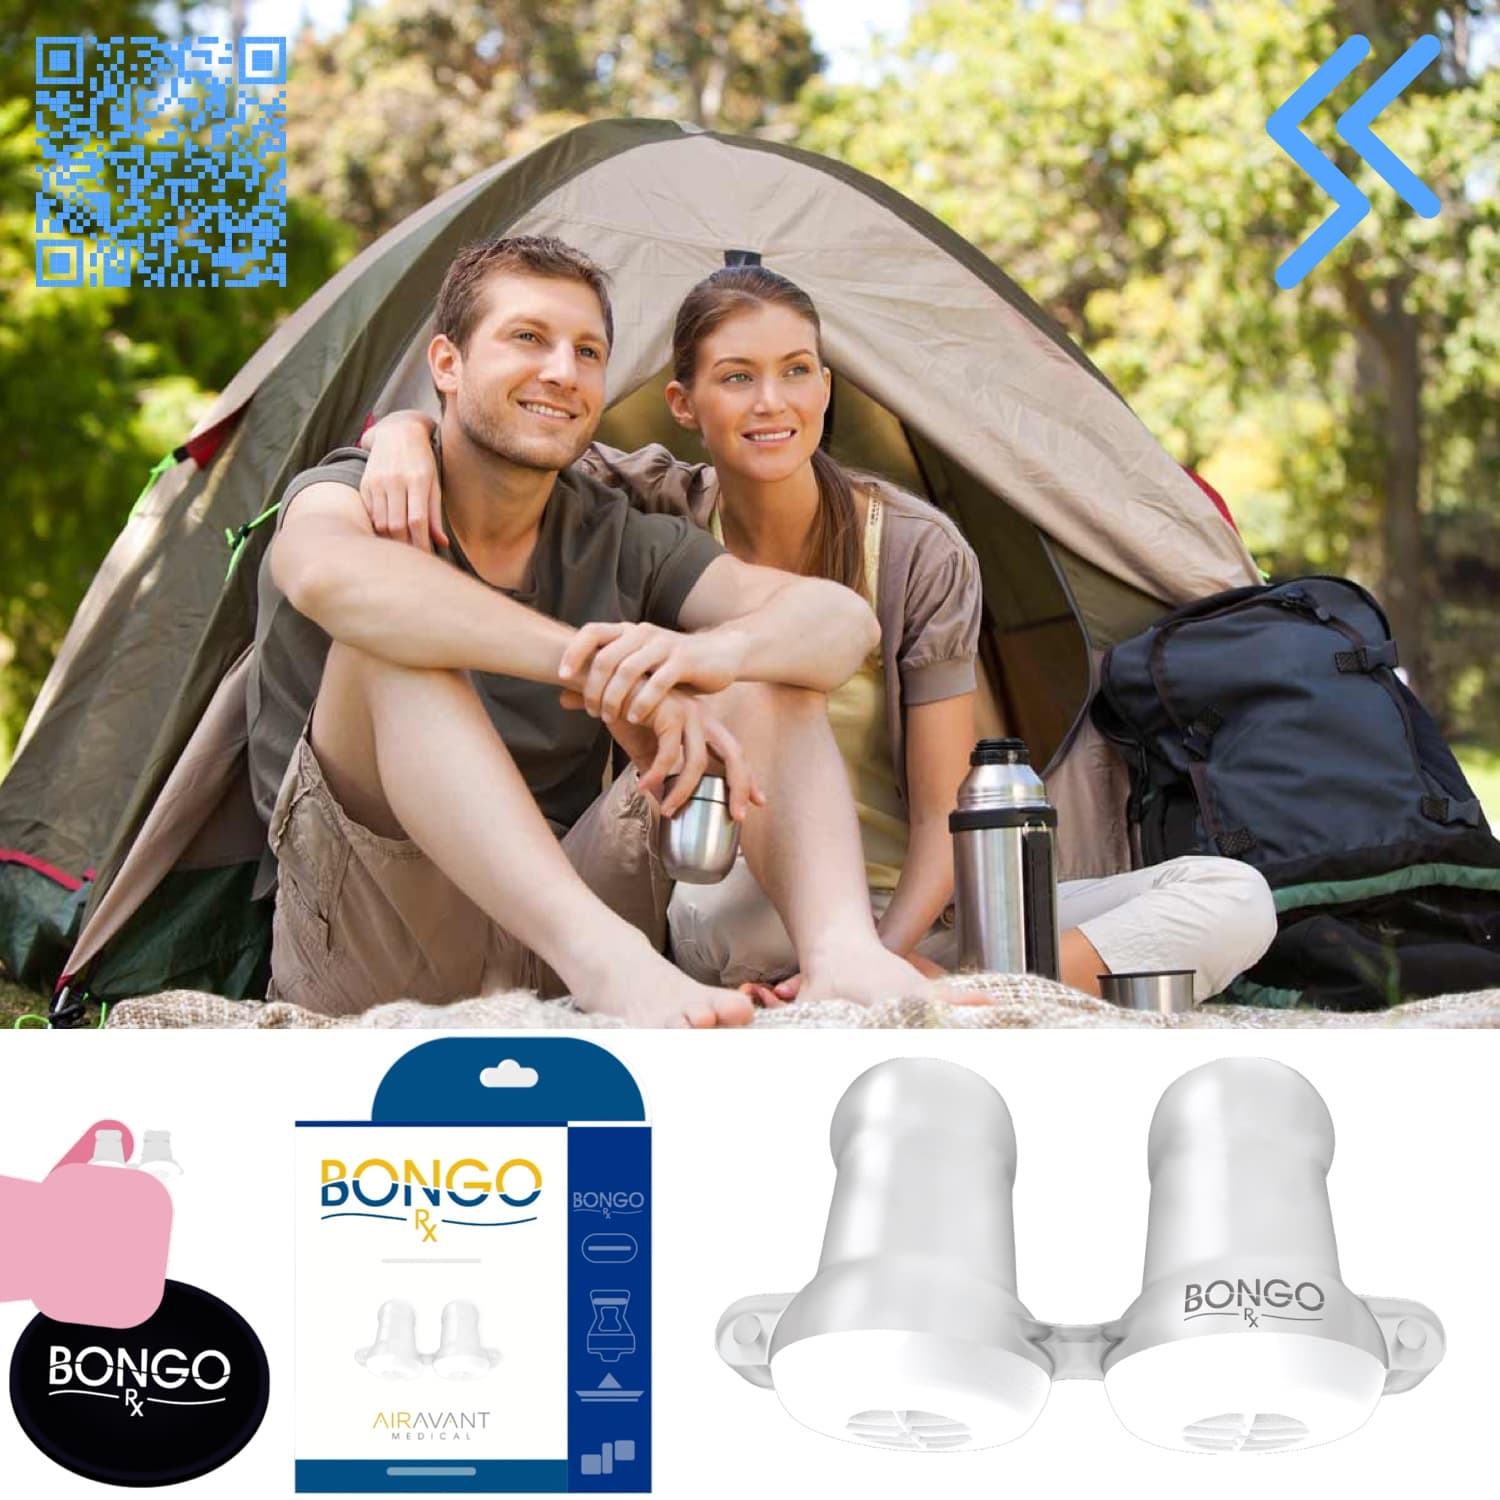 Bongo Rx - EPAP device on the camping